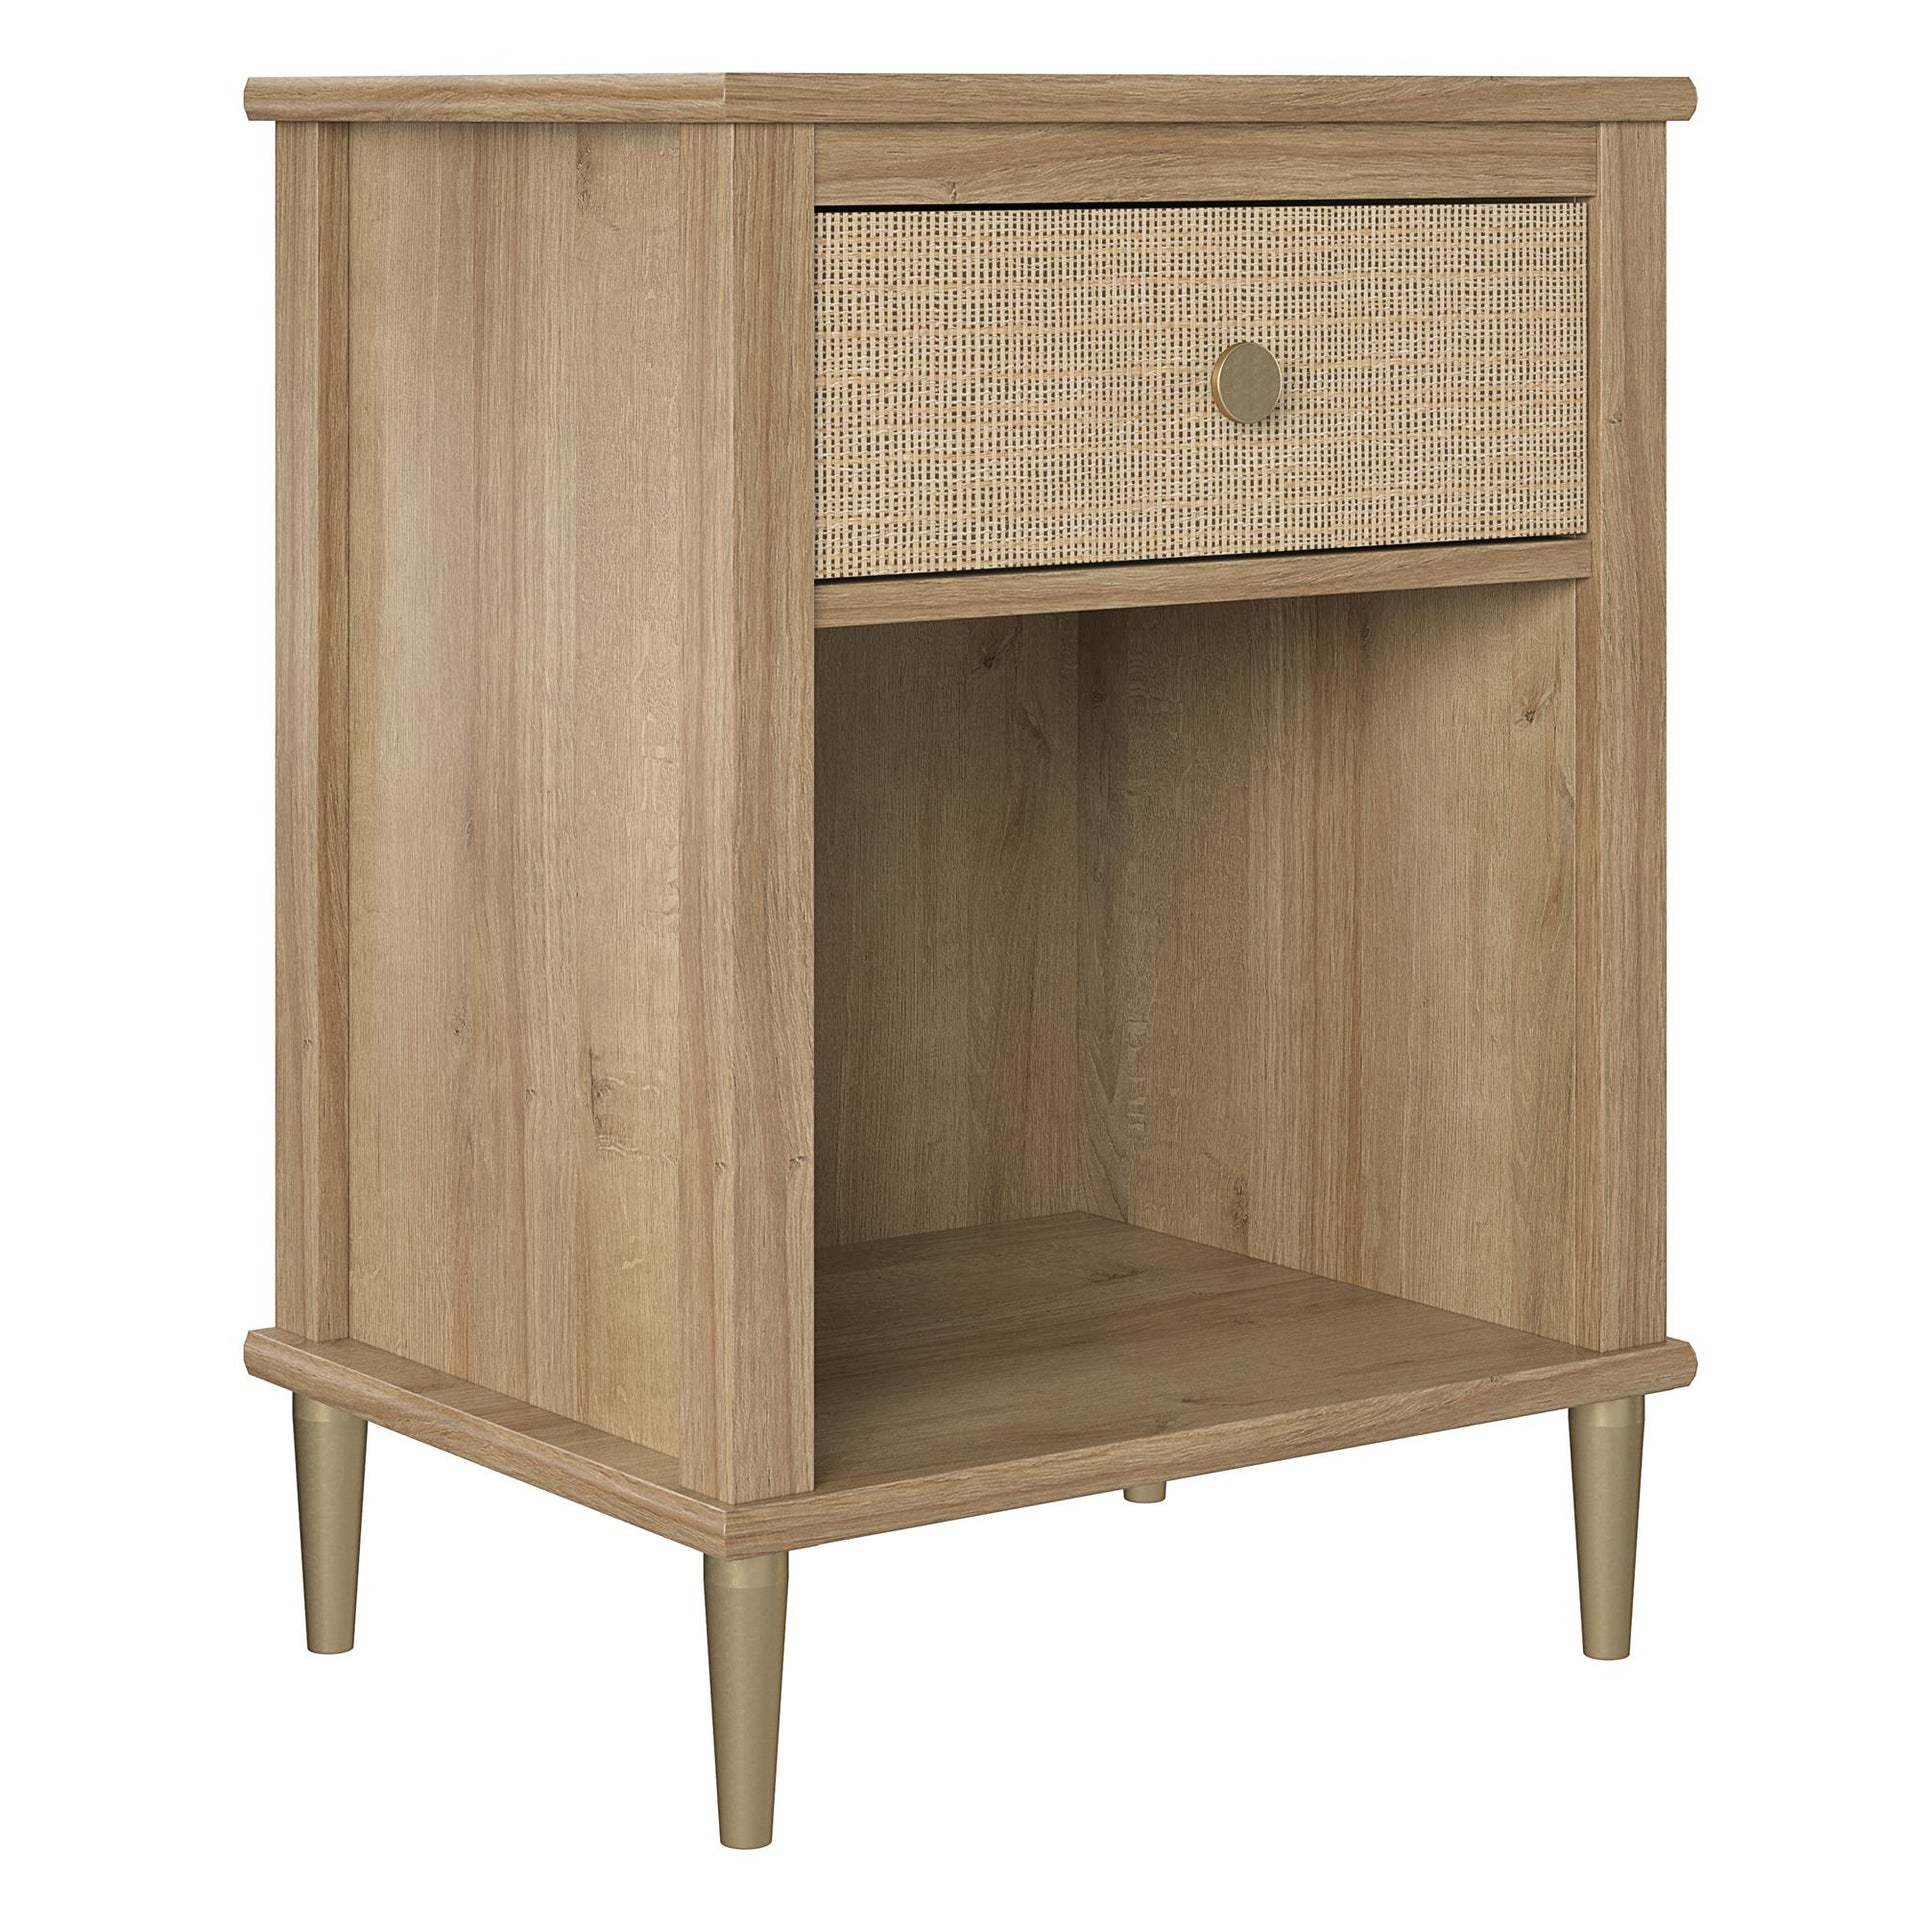 Shiloh Nightstand with Drawer and Lower Shelf - Natural